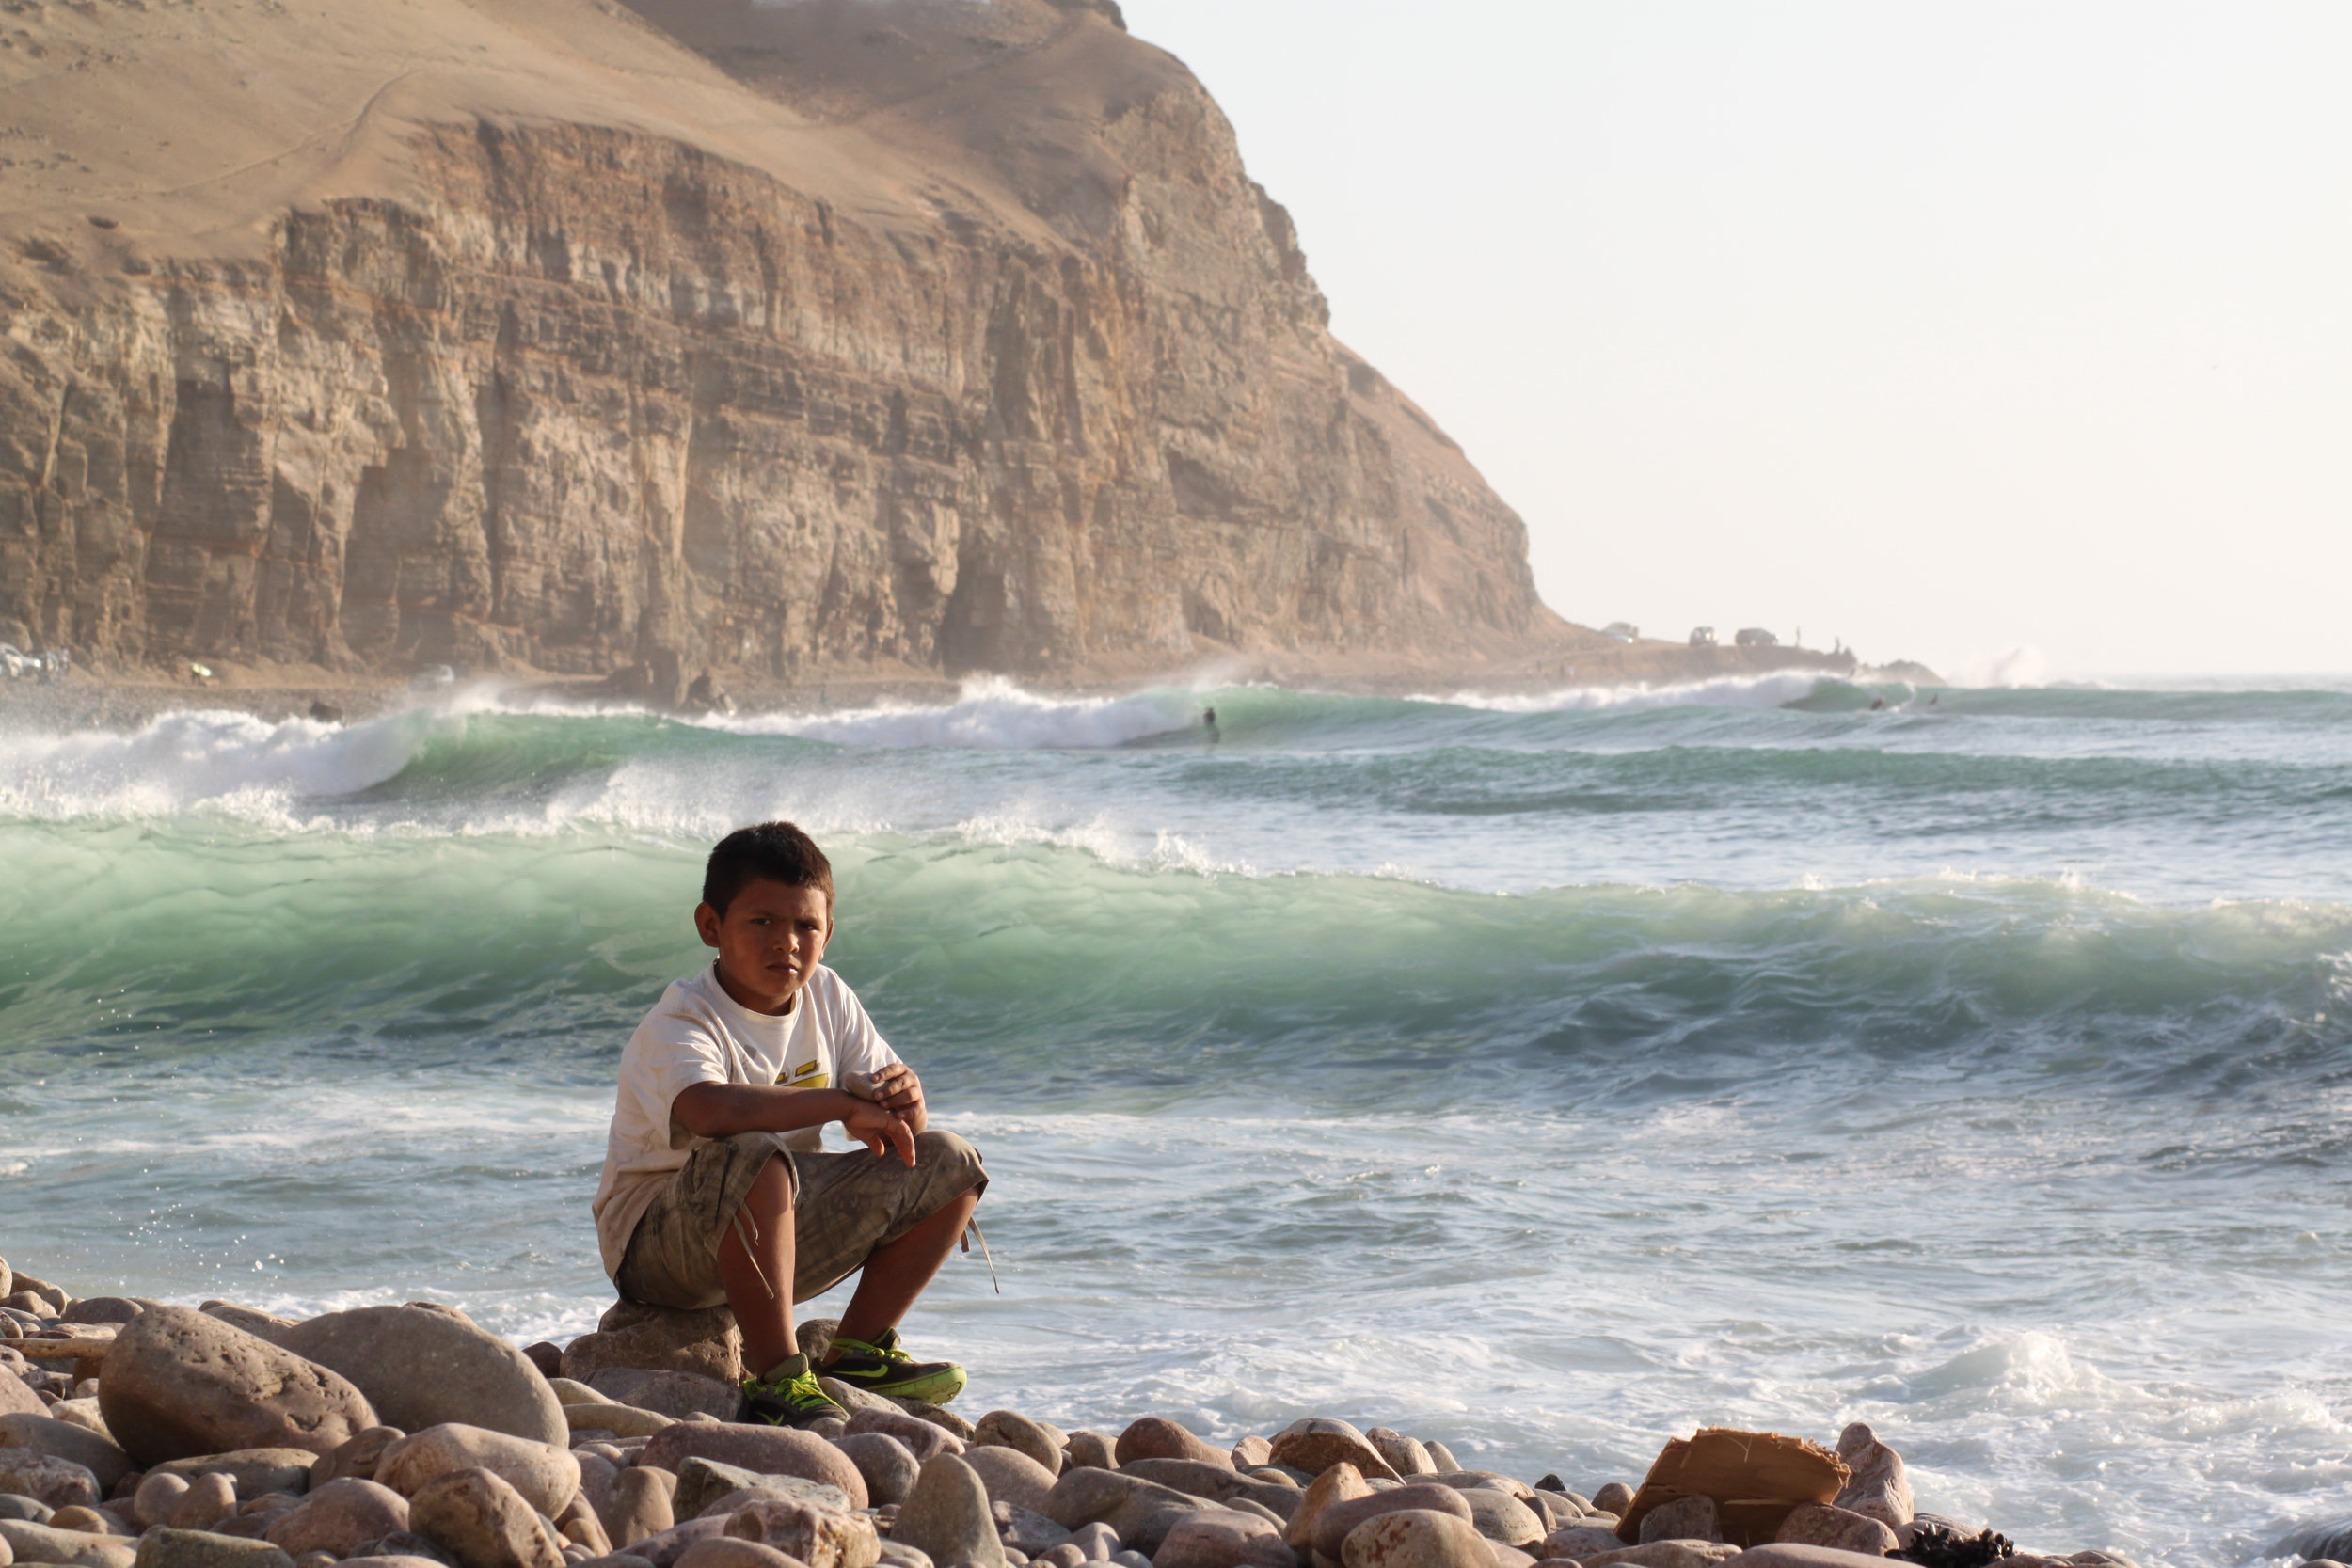 A boy sits on the shore of La Herradura, Lima, while waves are surfed in the distance.